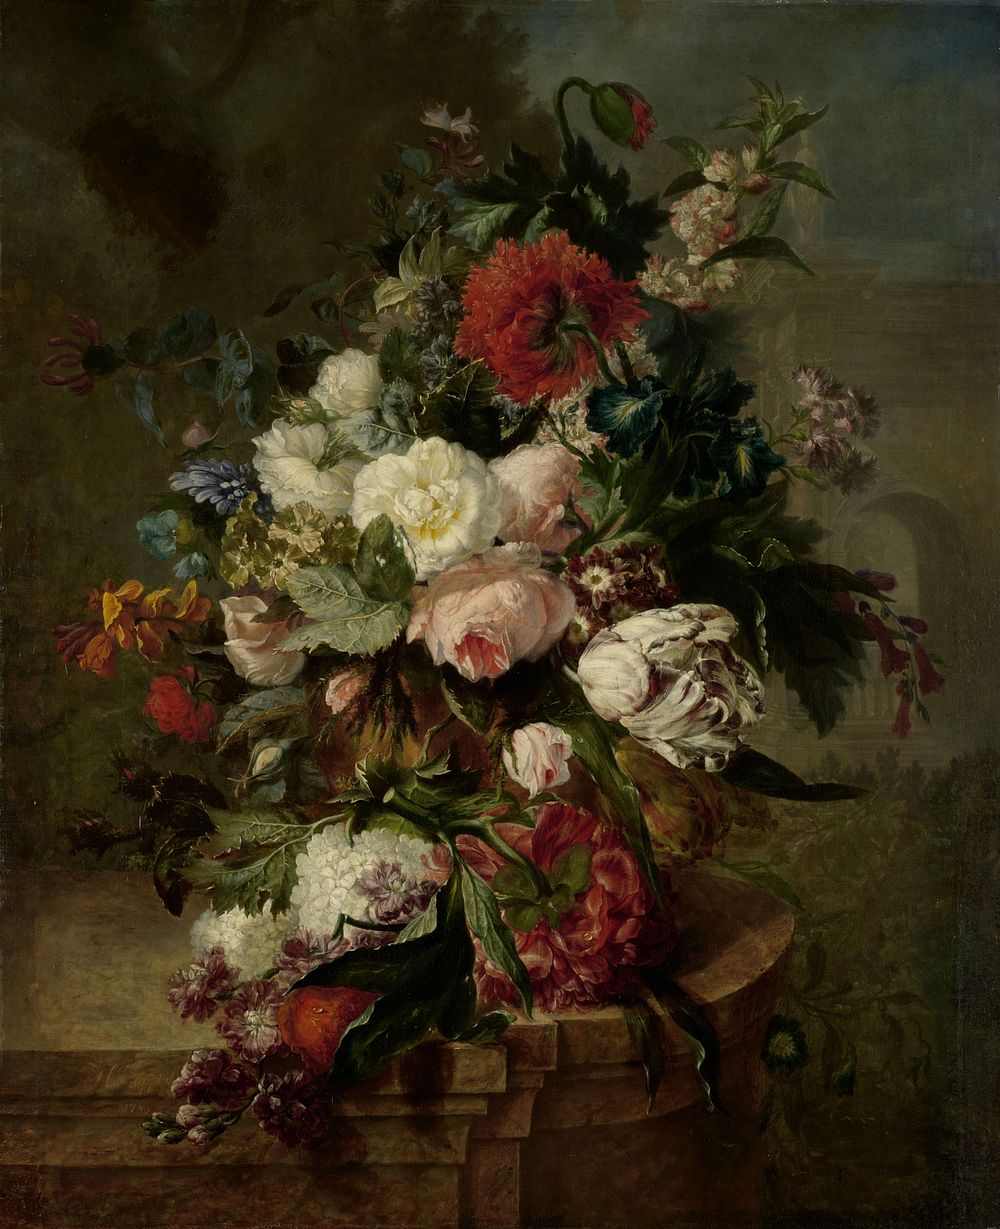 Still Life with Flowers (1789) by Harmanus Uppink